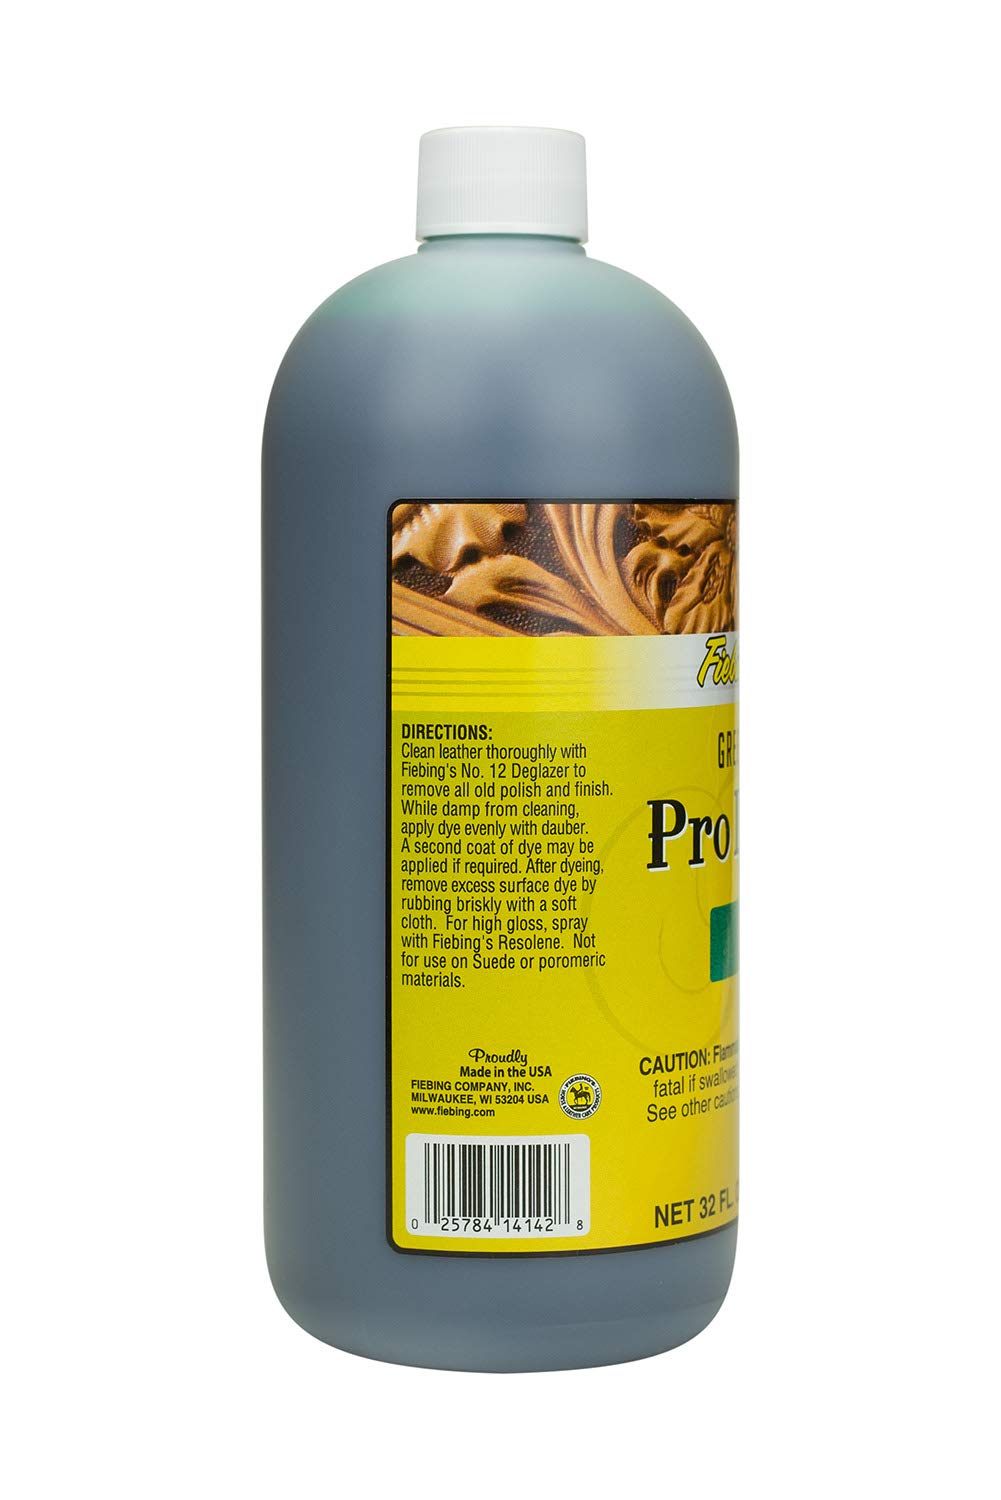 Fiebing's Pro Dye Green 32 Oz - Permanent Penetrating Professional Oil Dye for Dyeing Leather